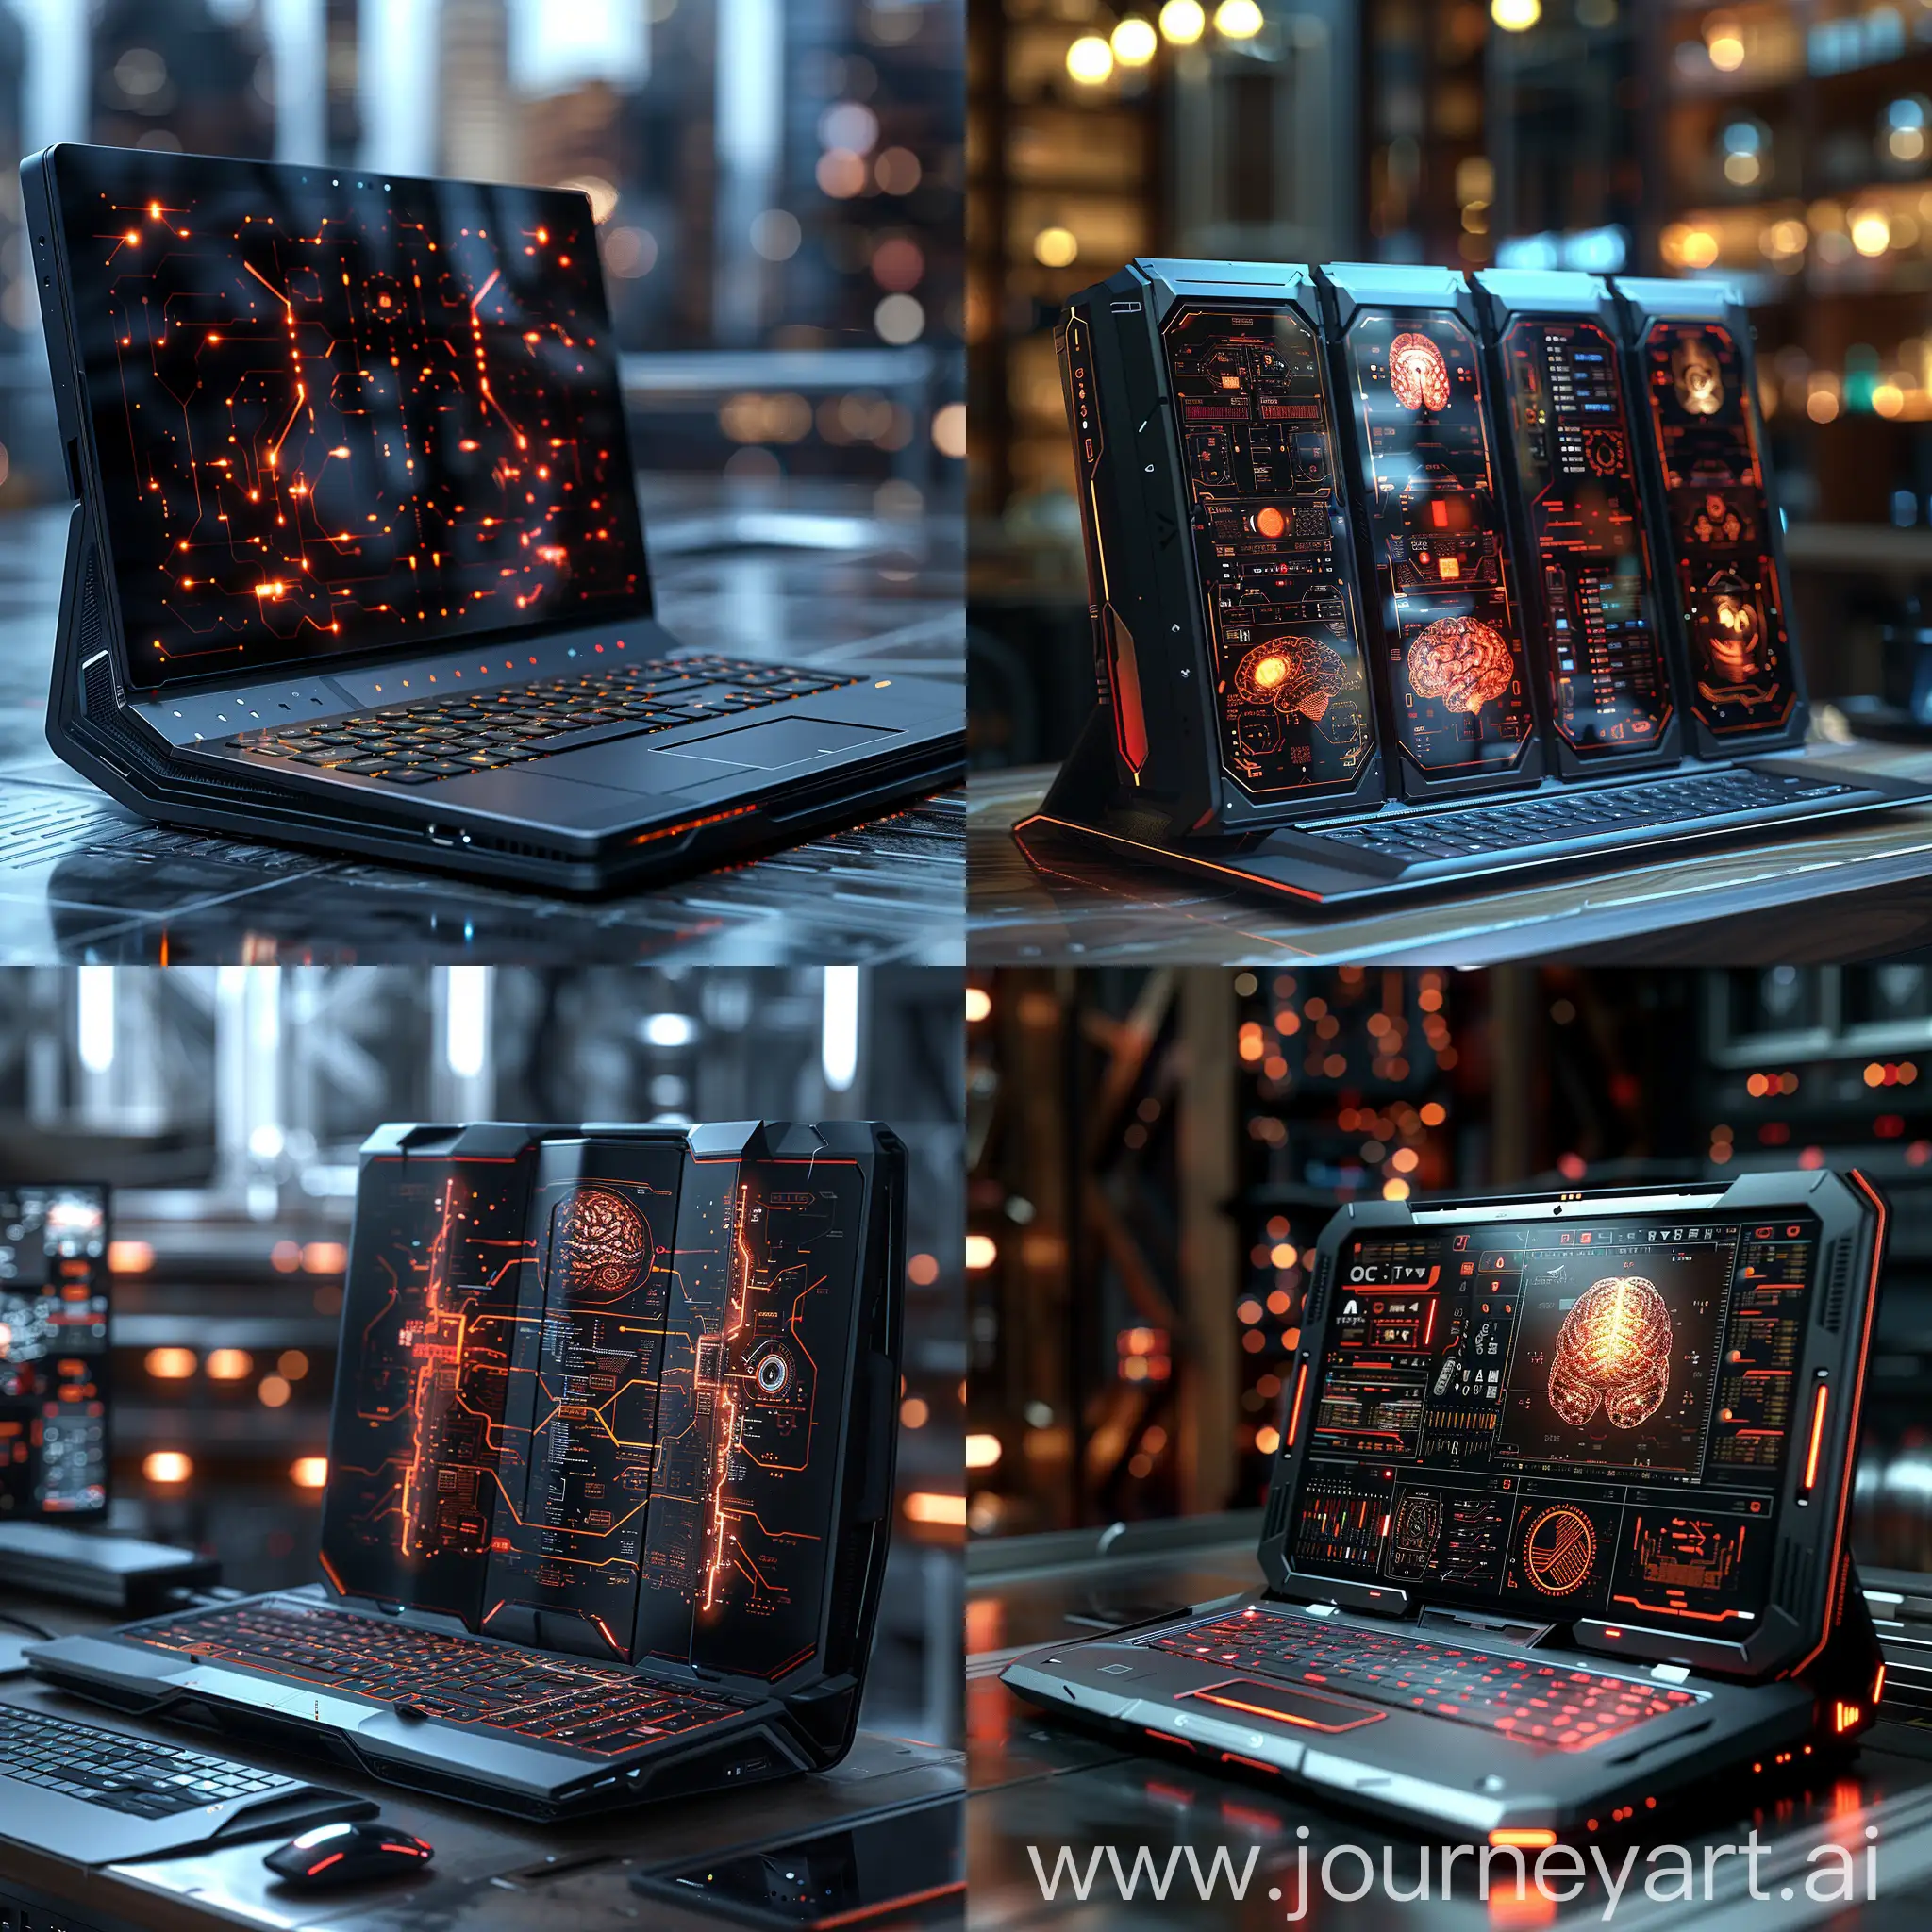 Ultramodern, futuristic laptop, Foldable OLED Display, Brain-Computer Interface (BCI) Integration, Augmented Reality (AR) Overlay, Self-Healing Materials, Ultra-Fast Wireless Connectivity, Advanced Holographic Projection, Enhanced Security Features, Quantum Computing Integration, Modular Design, AI-Powered Assistants, Military-Grade Materials, Liquid Cooling Systems, Shock and Vibration Dampening, Waterproofing and Dustproofing, Self-Diagnostics and Repair Systems, Integrated Solar Panels, Electromagnetic Shielding, Anti-Tamper Mechanisms, Ergonomic Design for Comfort, Stylish and Discreet Design, octane render --stylize 1000